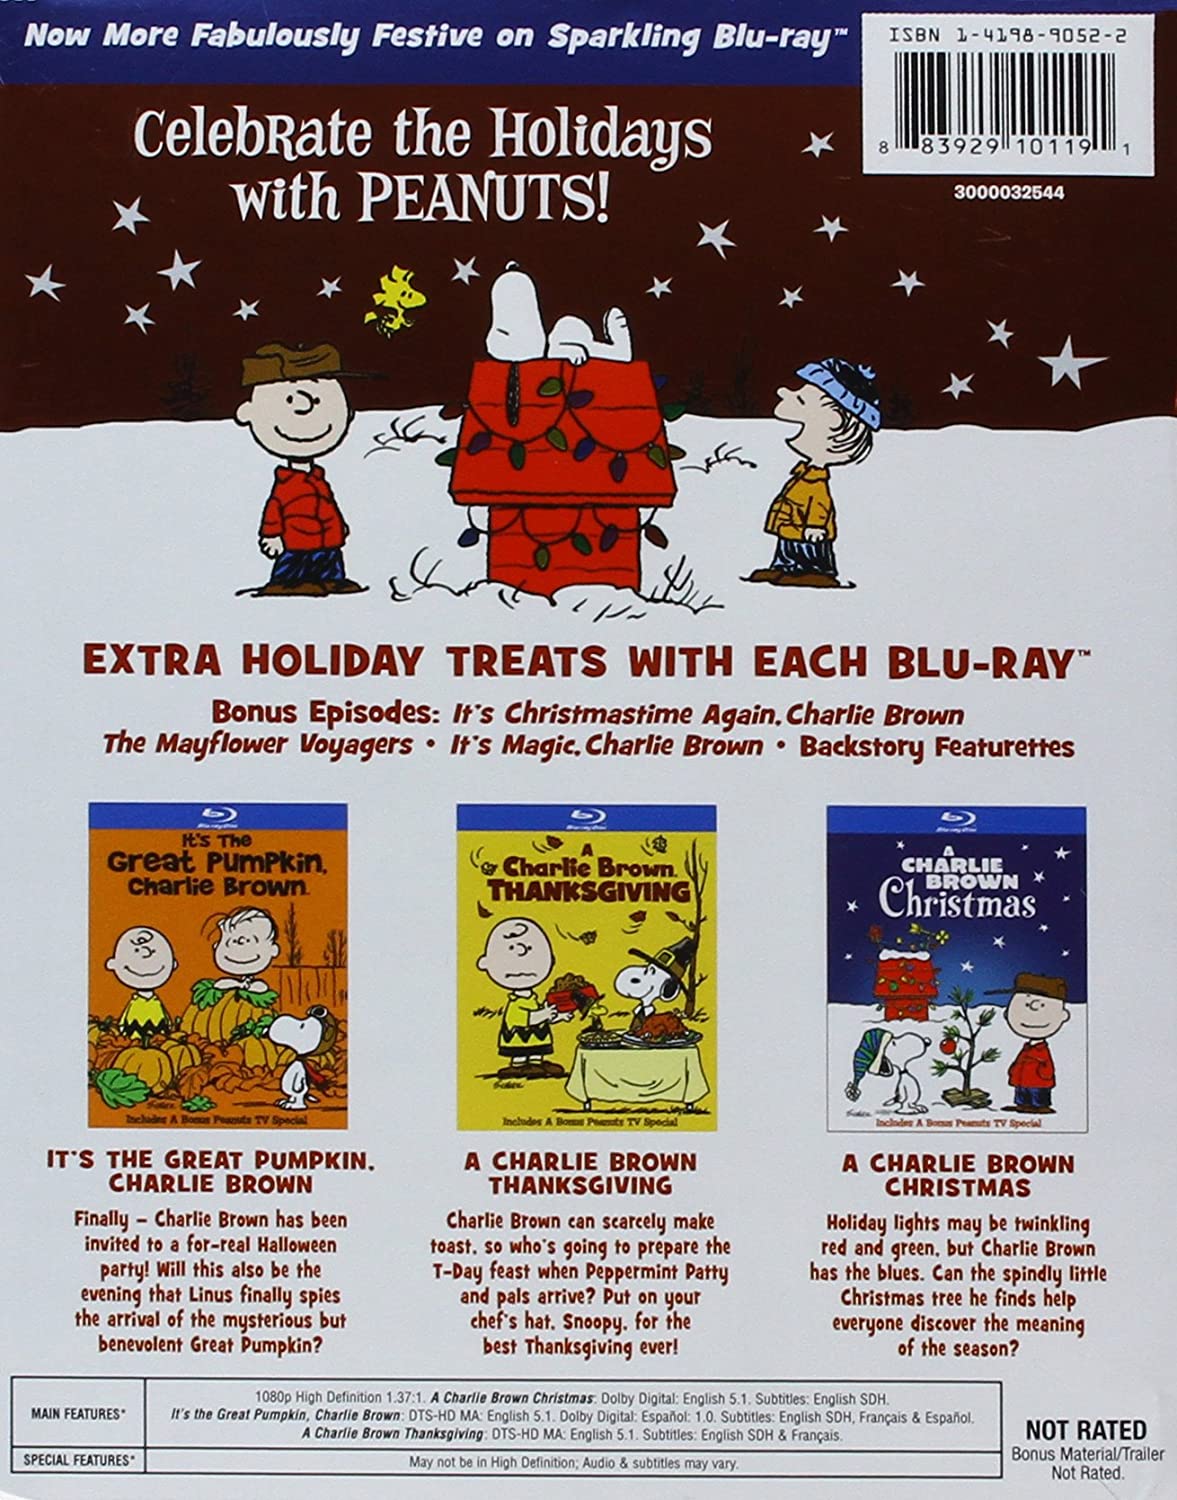 Peanuts Deluxe Holiday Collection [Blu-Ray Box Set] - image 2 of 5